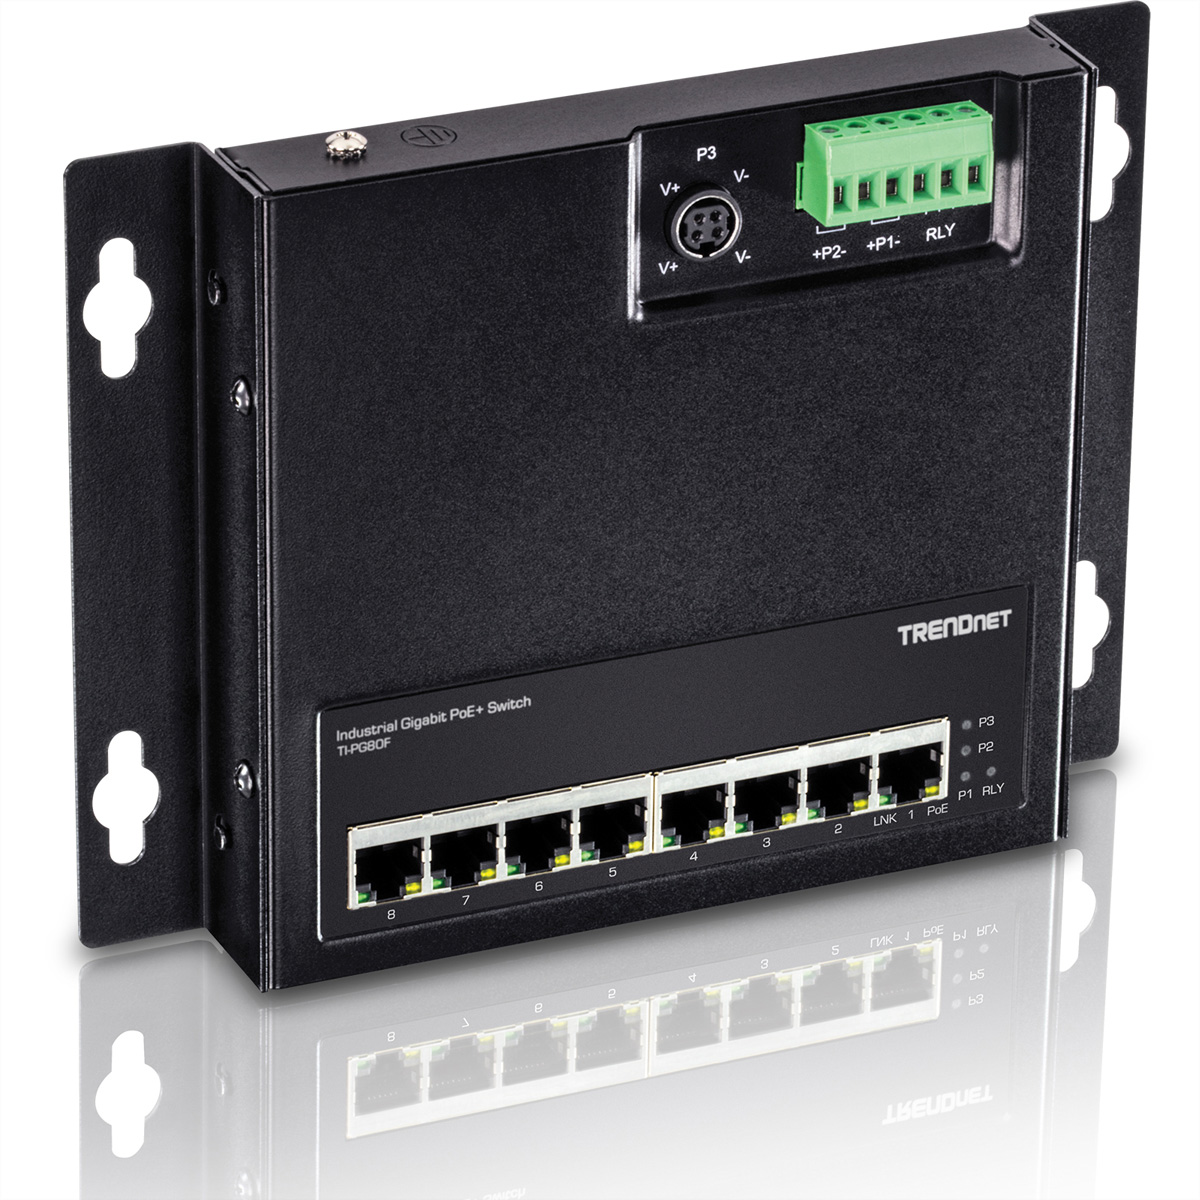 TRENDnet TI-PG80F 8-Port Industrial PoE+ Gigabit Wall-Mount Front Access Switch